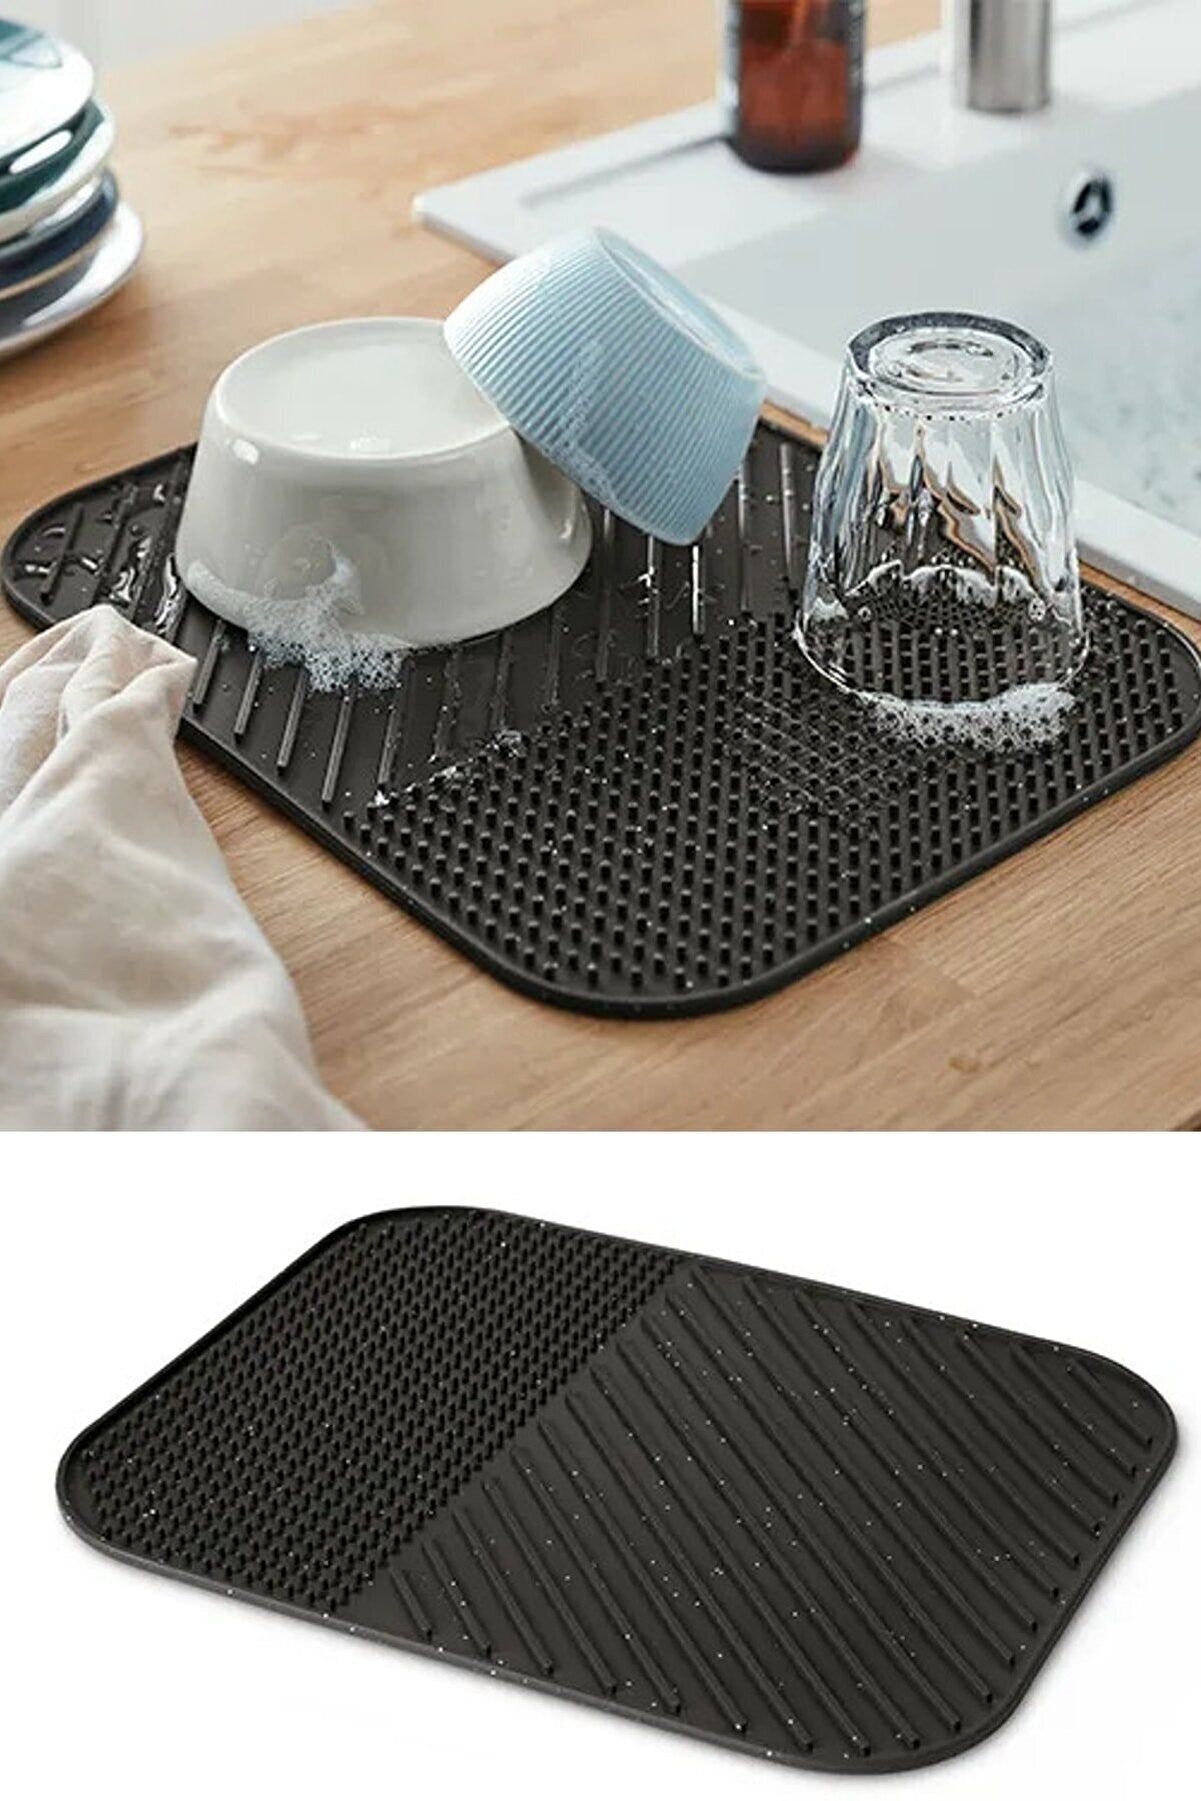 Dish Drying Mat Dish Rack - Silicone Dish Mat with Water Repellent Feature